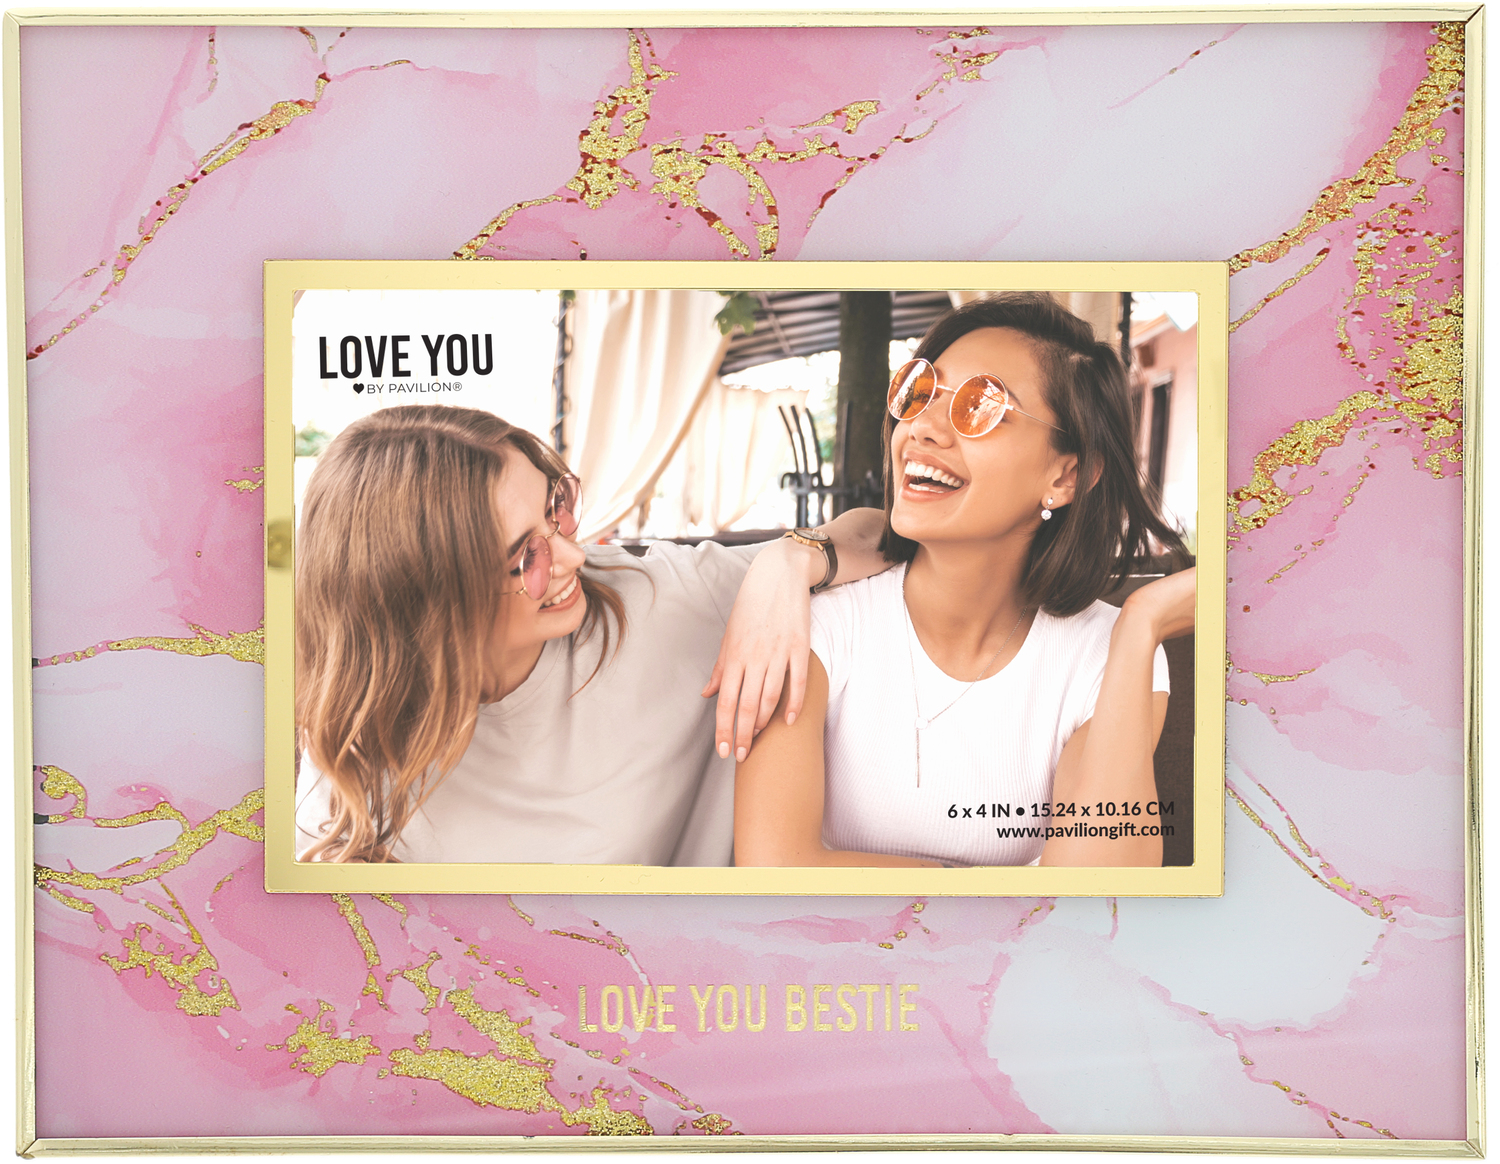 Love You Bestie by Love You - Love You Bestie - 9.75" x 7.25"  Frame
(Holds 6" x 4" Photo)